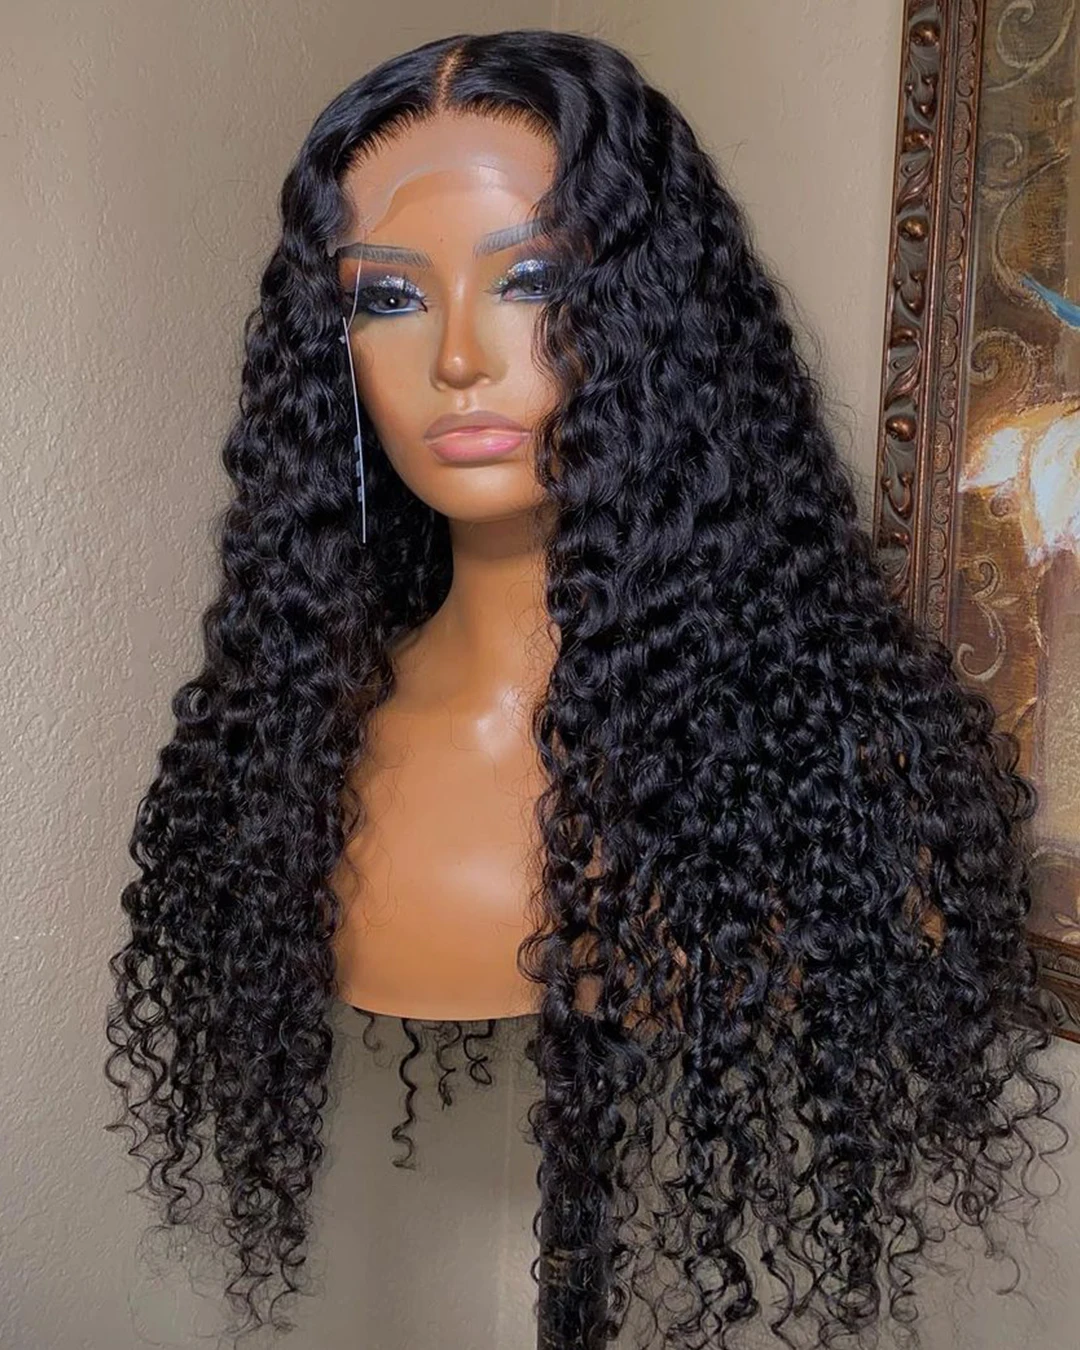 Clearance Sale 13x4/13x6 Water Wave Lace Front Human Hair Wigs For Women Brazilian 4x4 Loose Deep Lace Closure Wig Glueless Hair